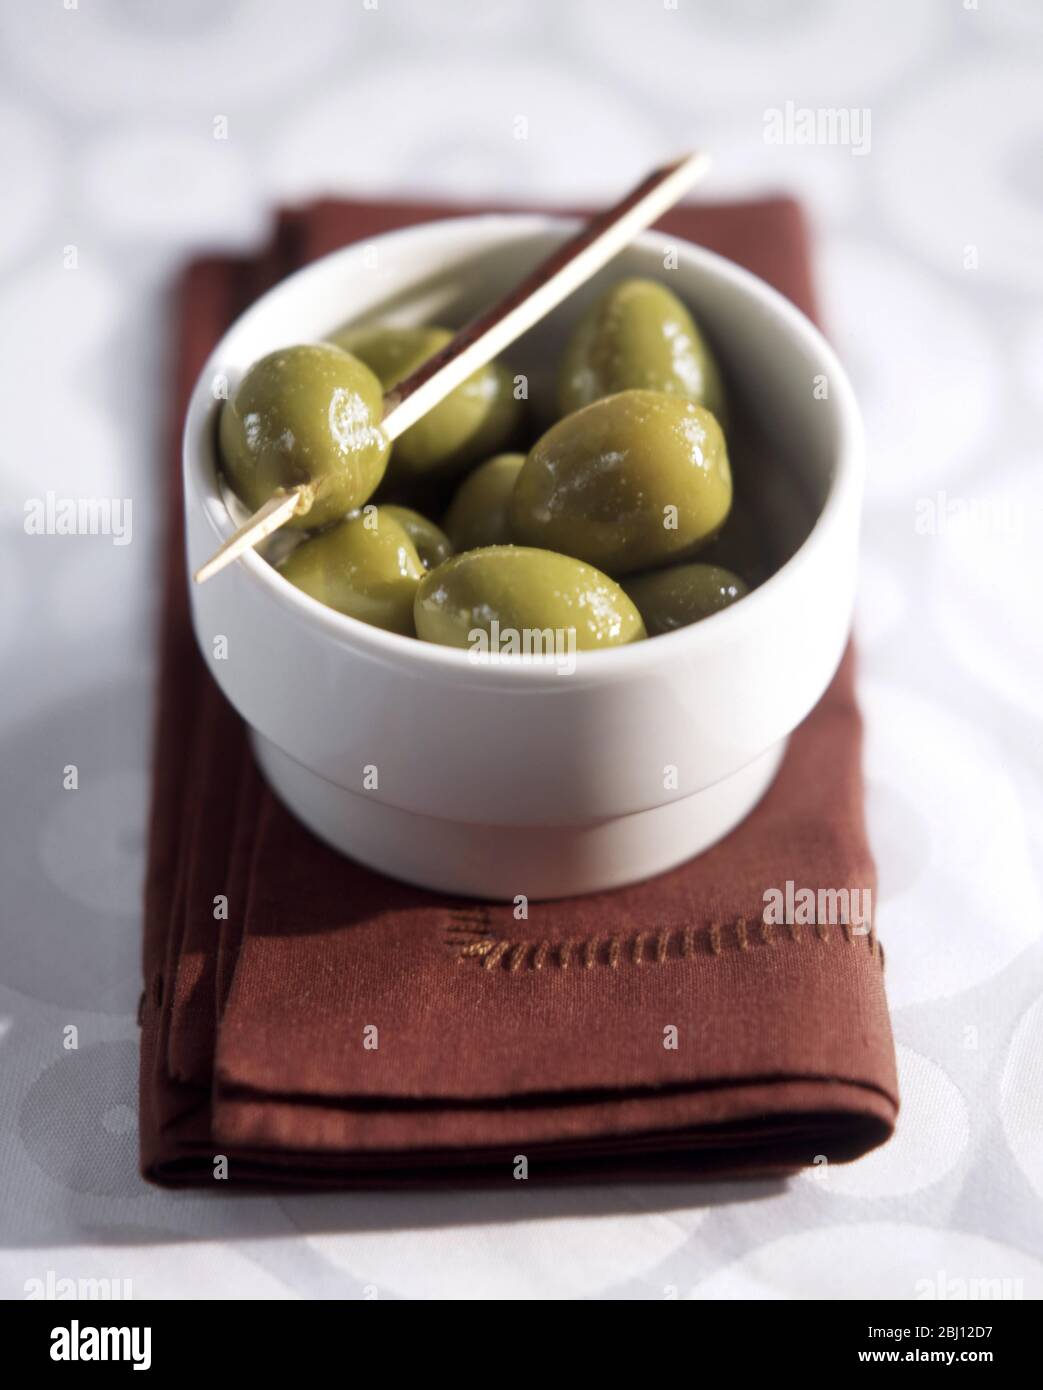 Small white dish of large queen olives on brown napkin with toothpick spearing one olive - Stock Photo